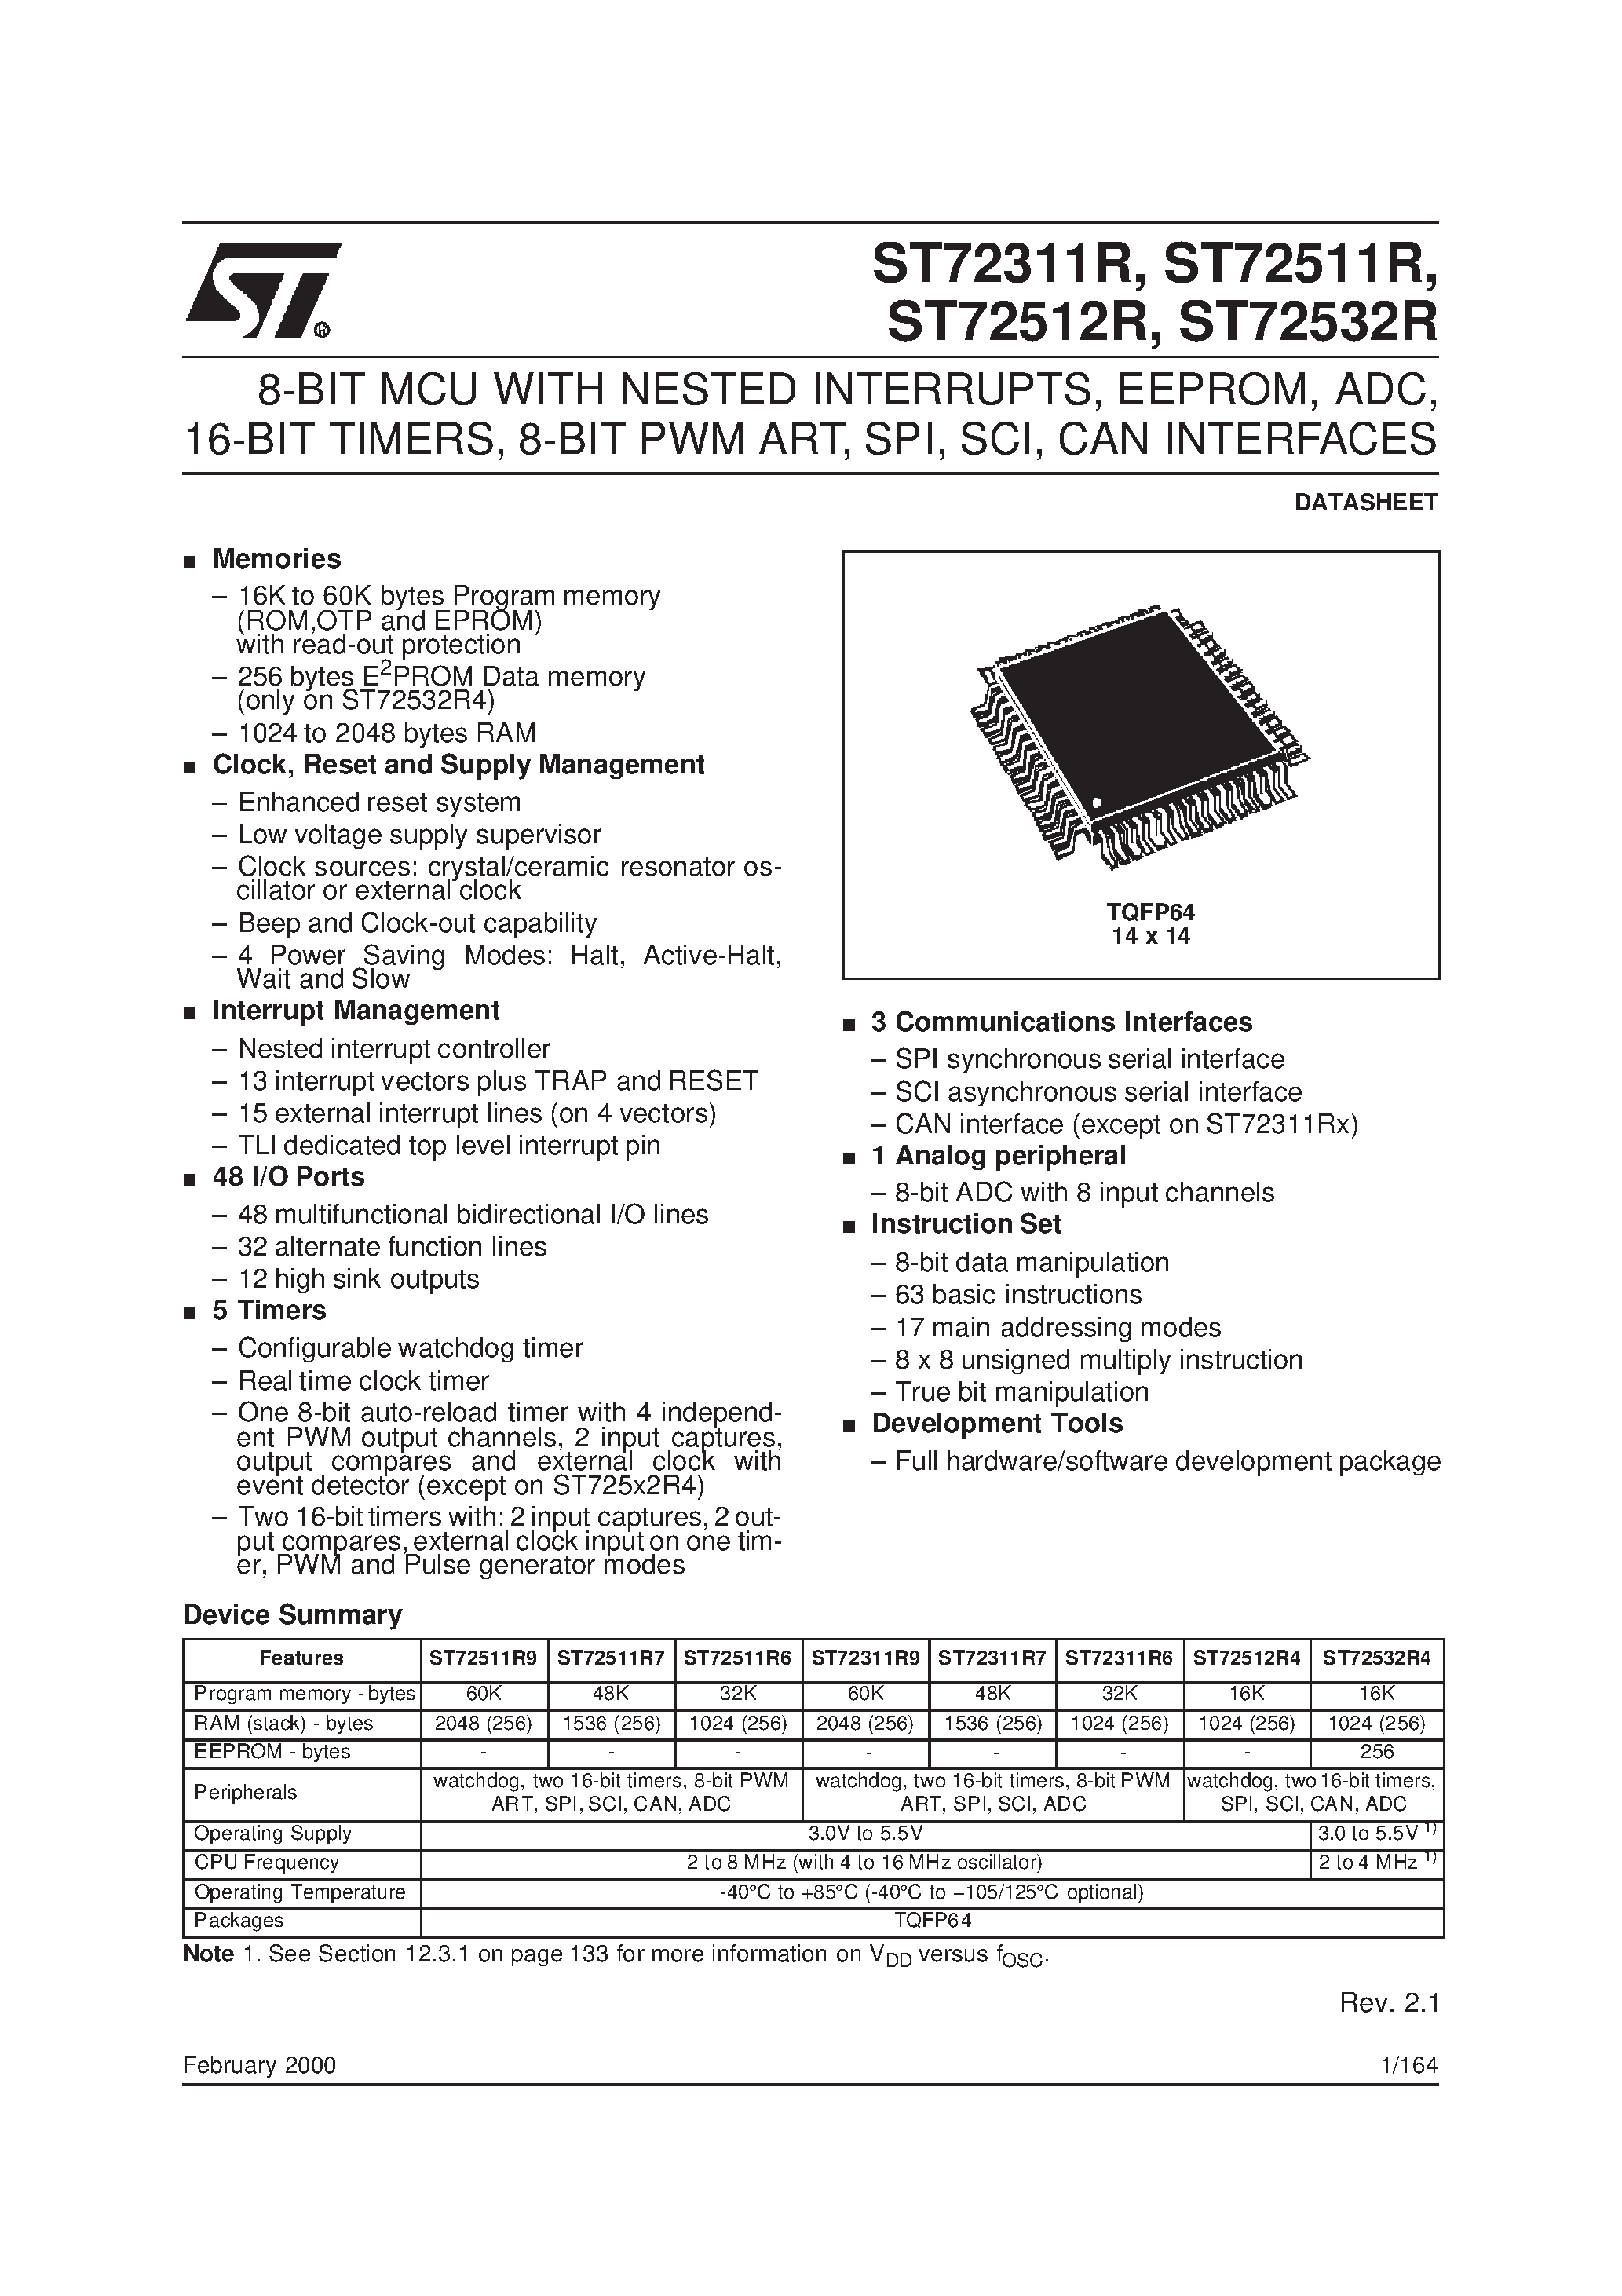 Datasheet ST72311R - (ST72T311R - ST72T532R) 8-BIT MCU WITH NESTED INTERRUPTS page 1